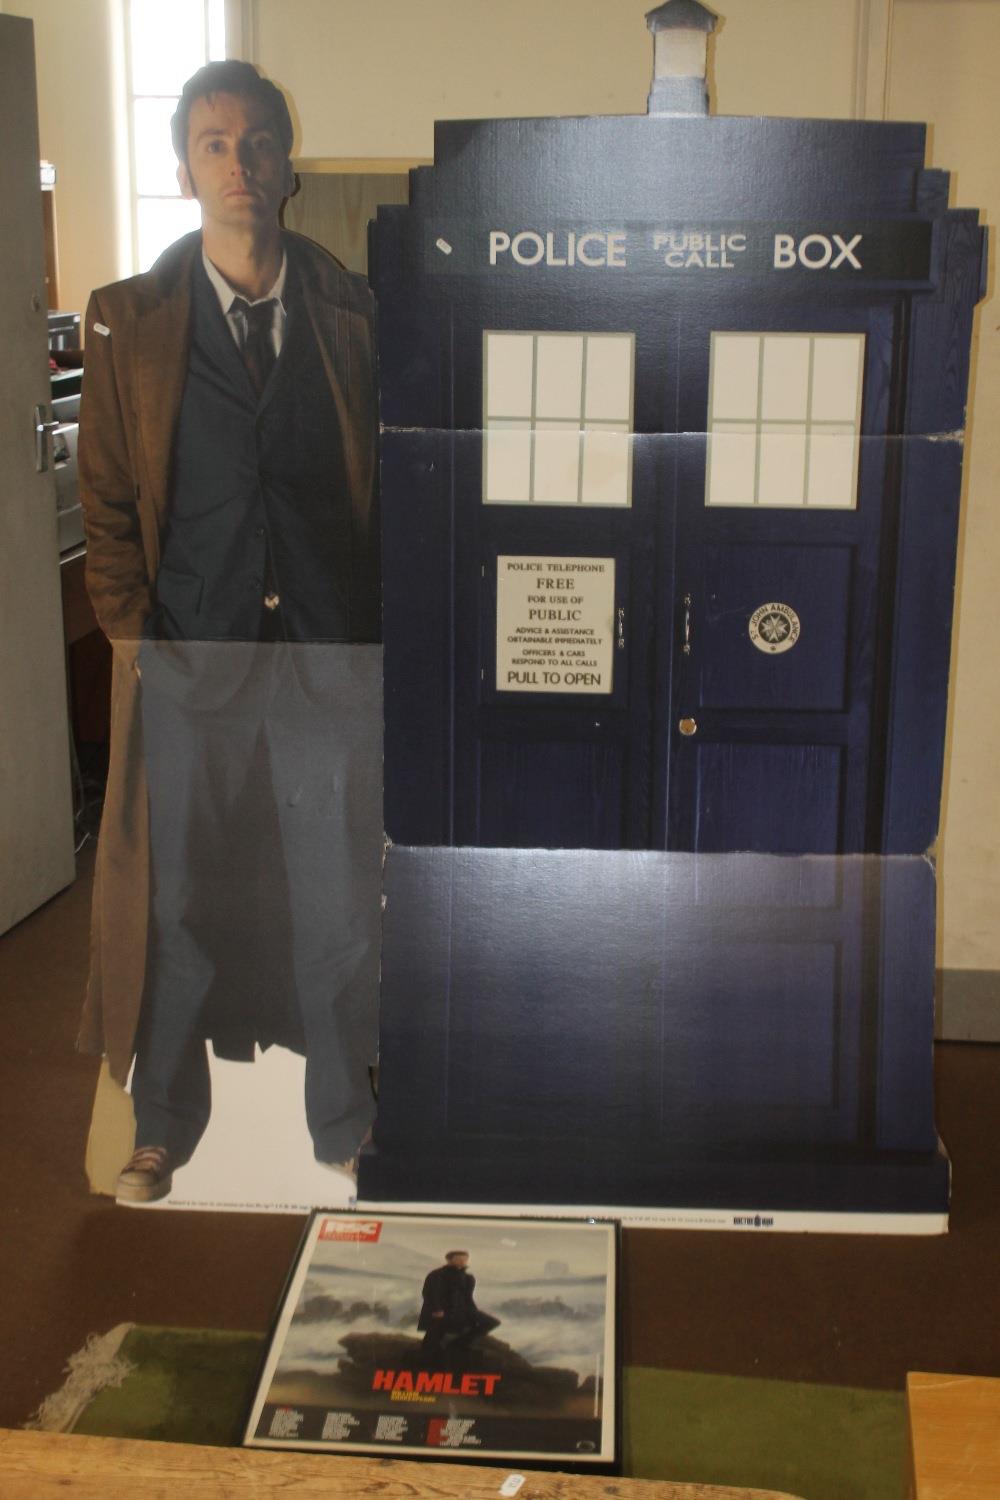 DR WHO INTEREST - TWO FREE STANDING CARDBOARD FIGURES, The Tardis and David Tennant, unidentified